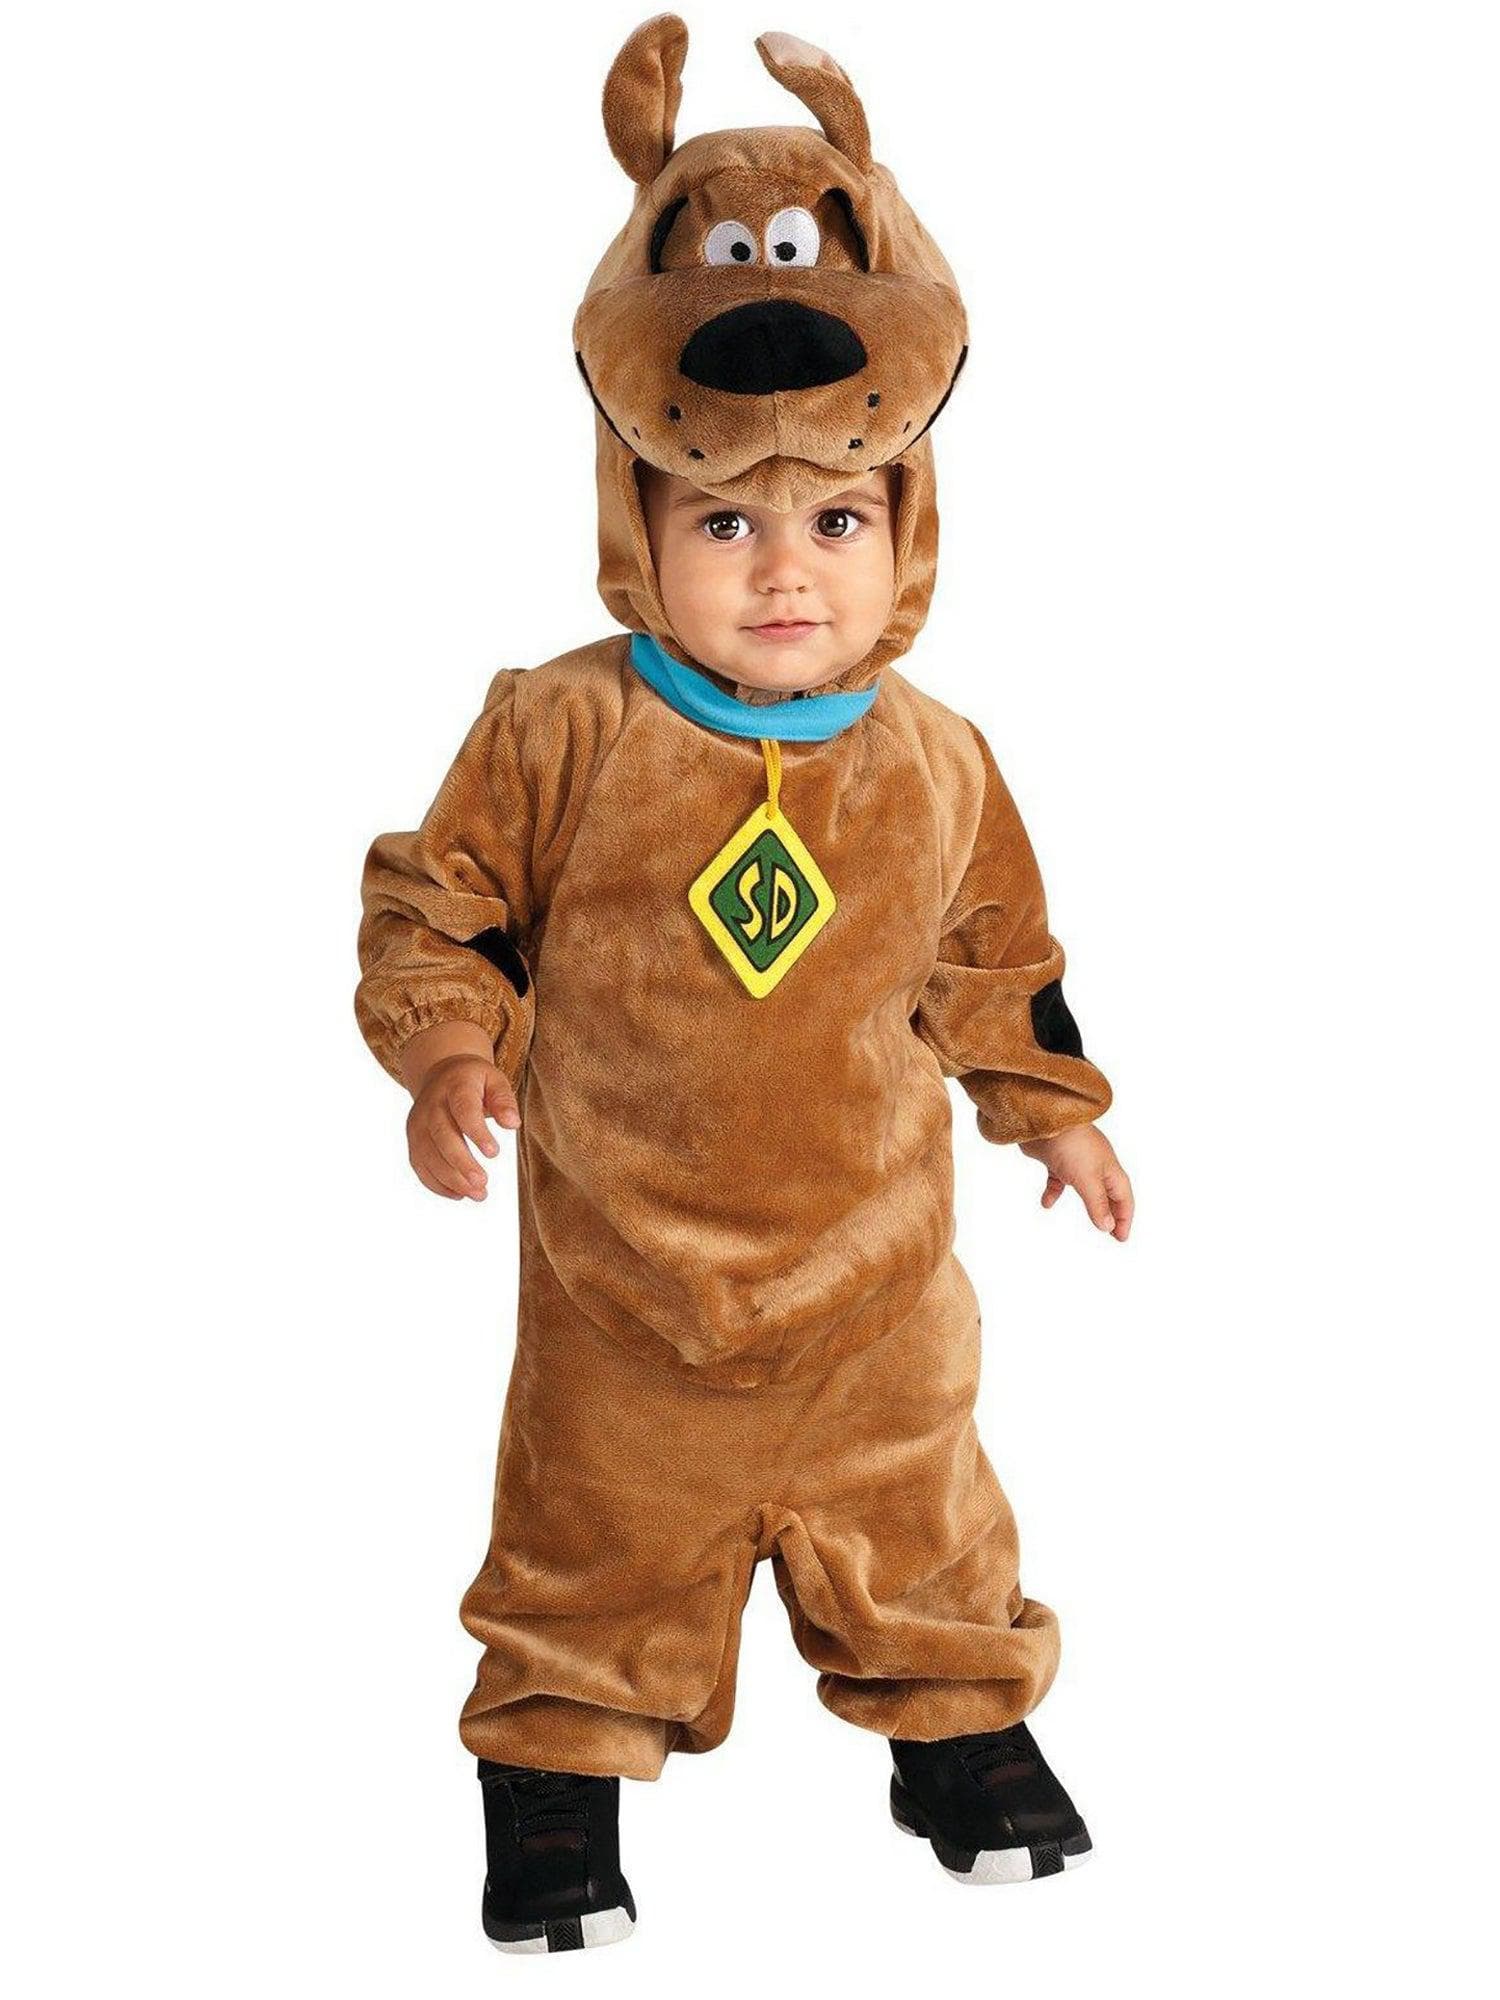 Scooby-Doo Costume for Babies and Toddlers - costumes.com